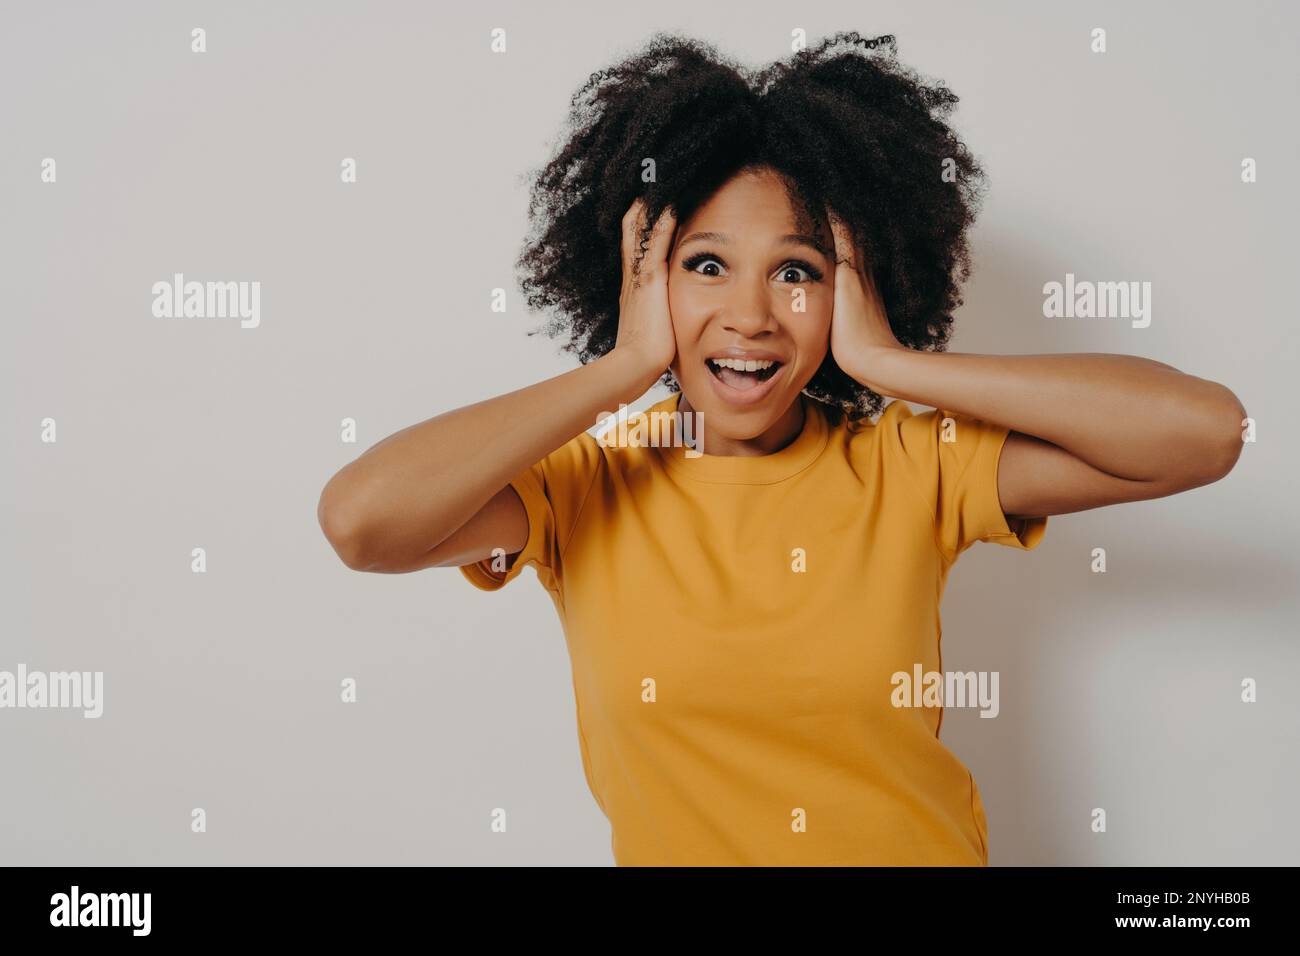 Woman plugging ears with arms does not want to listen hard rock or loud music. African American young female ignoring noise covering head with hands a Stock Photo